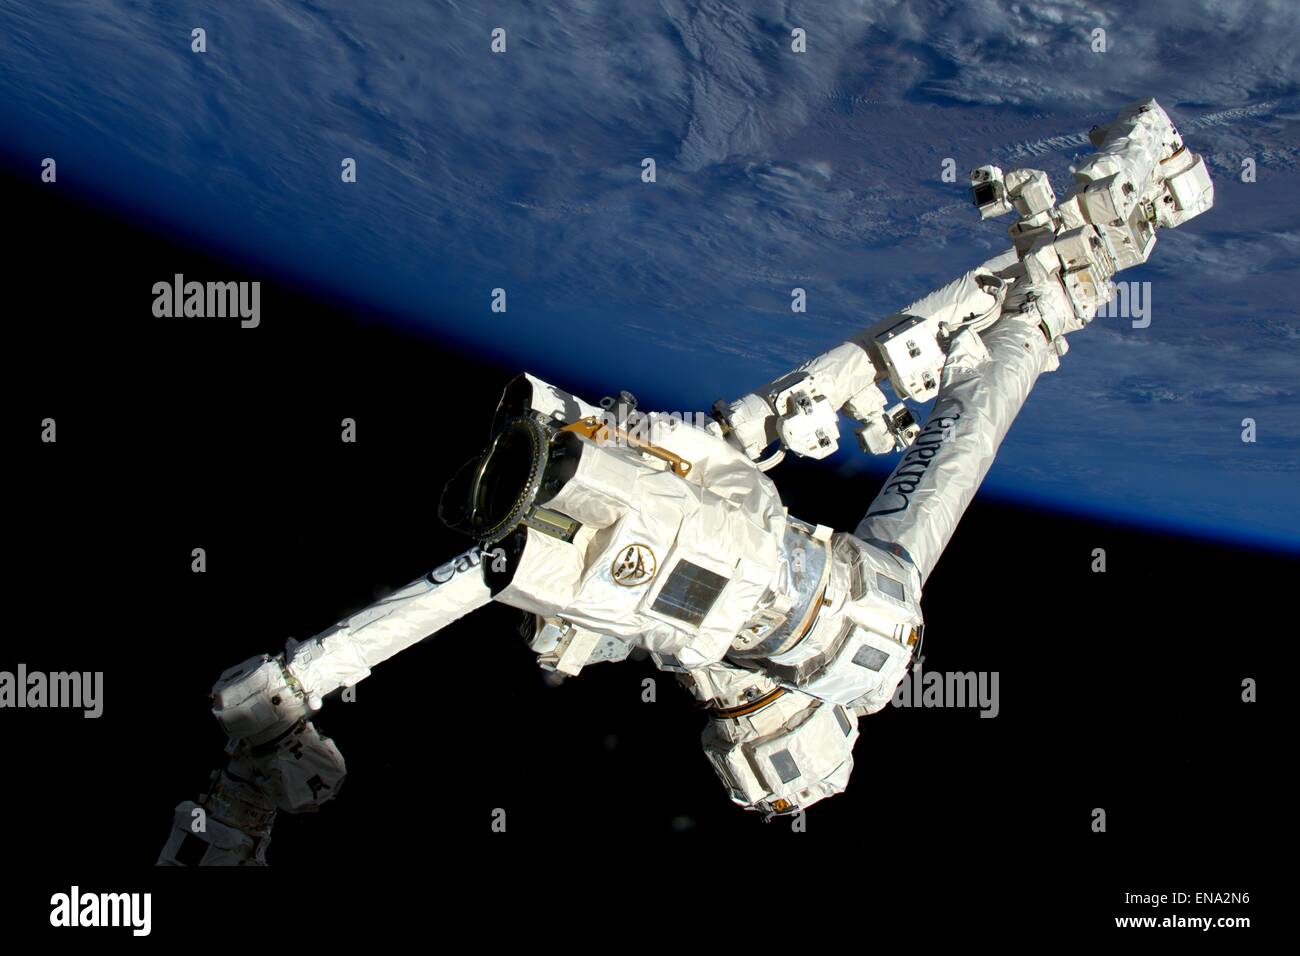 The Canada arm 2 on the International Space Station April 9, 2015 in Earth Orbit. Stock Photo